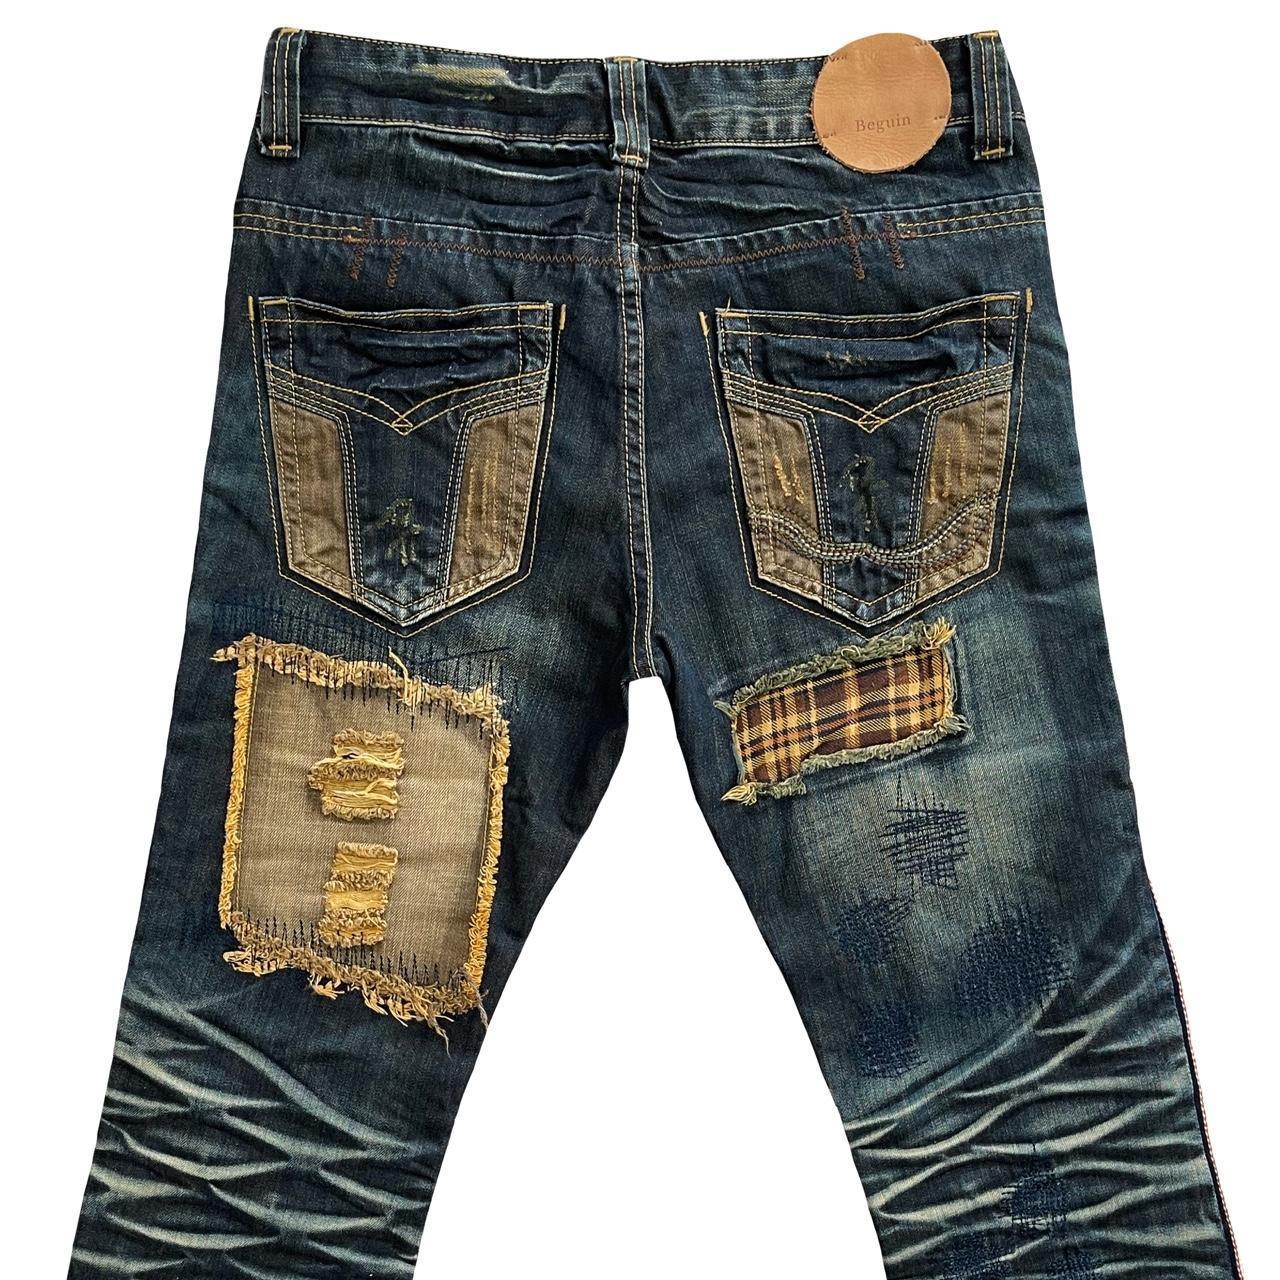 Beguin Distressed Jeans - Known Source